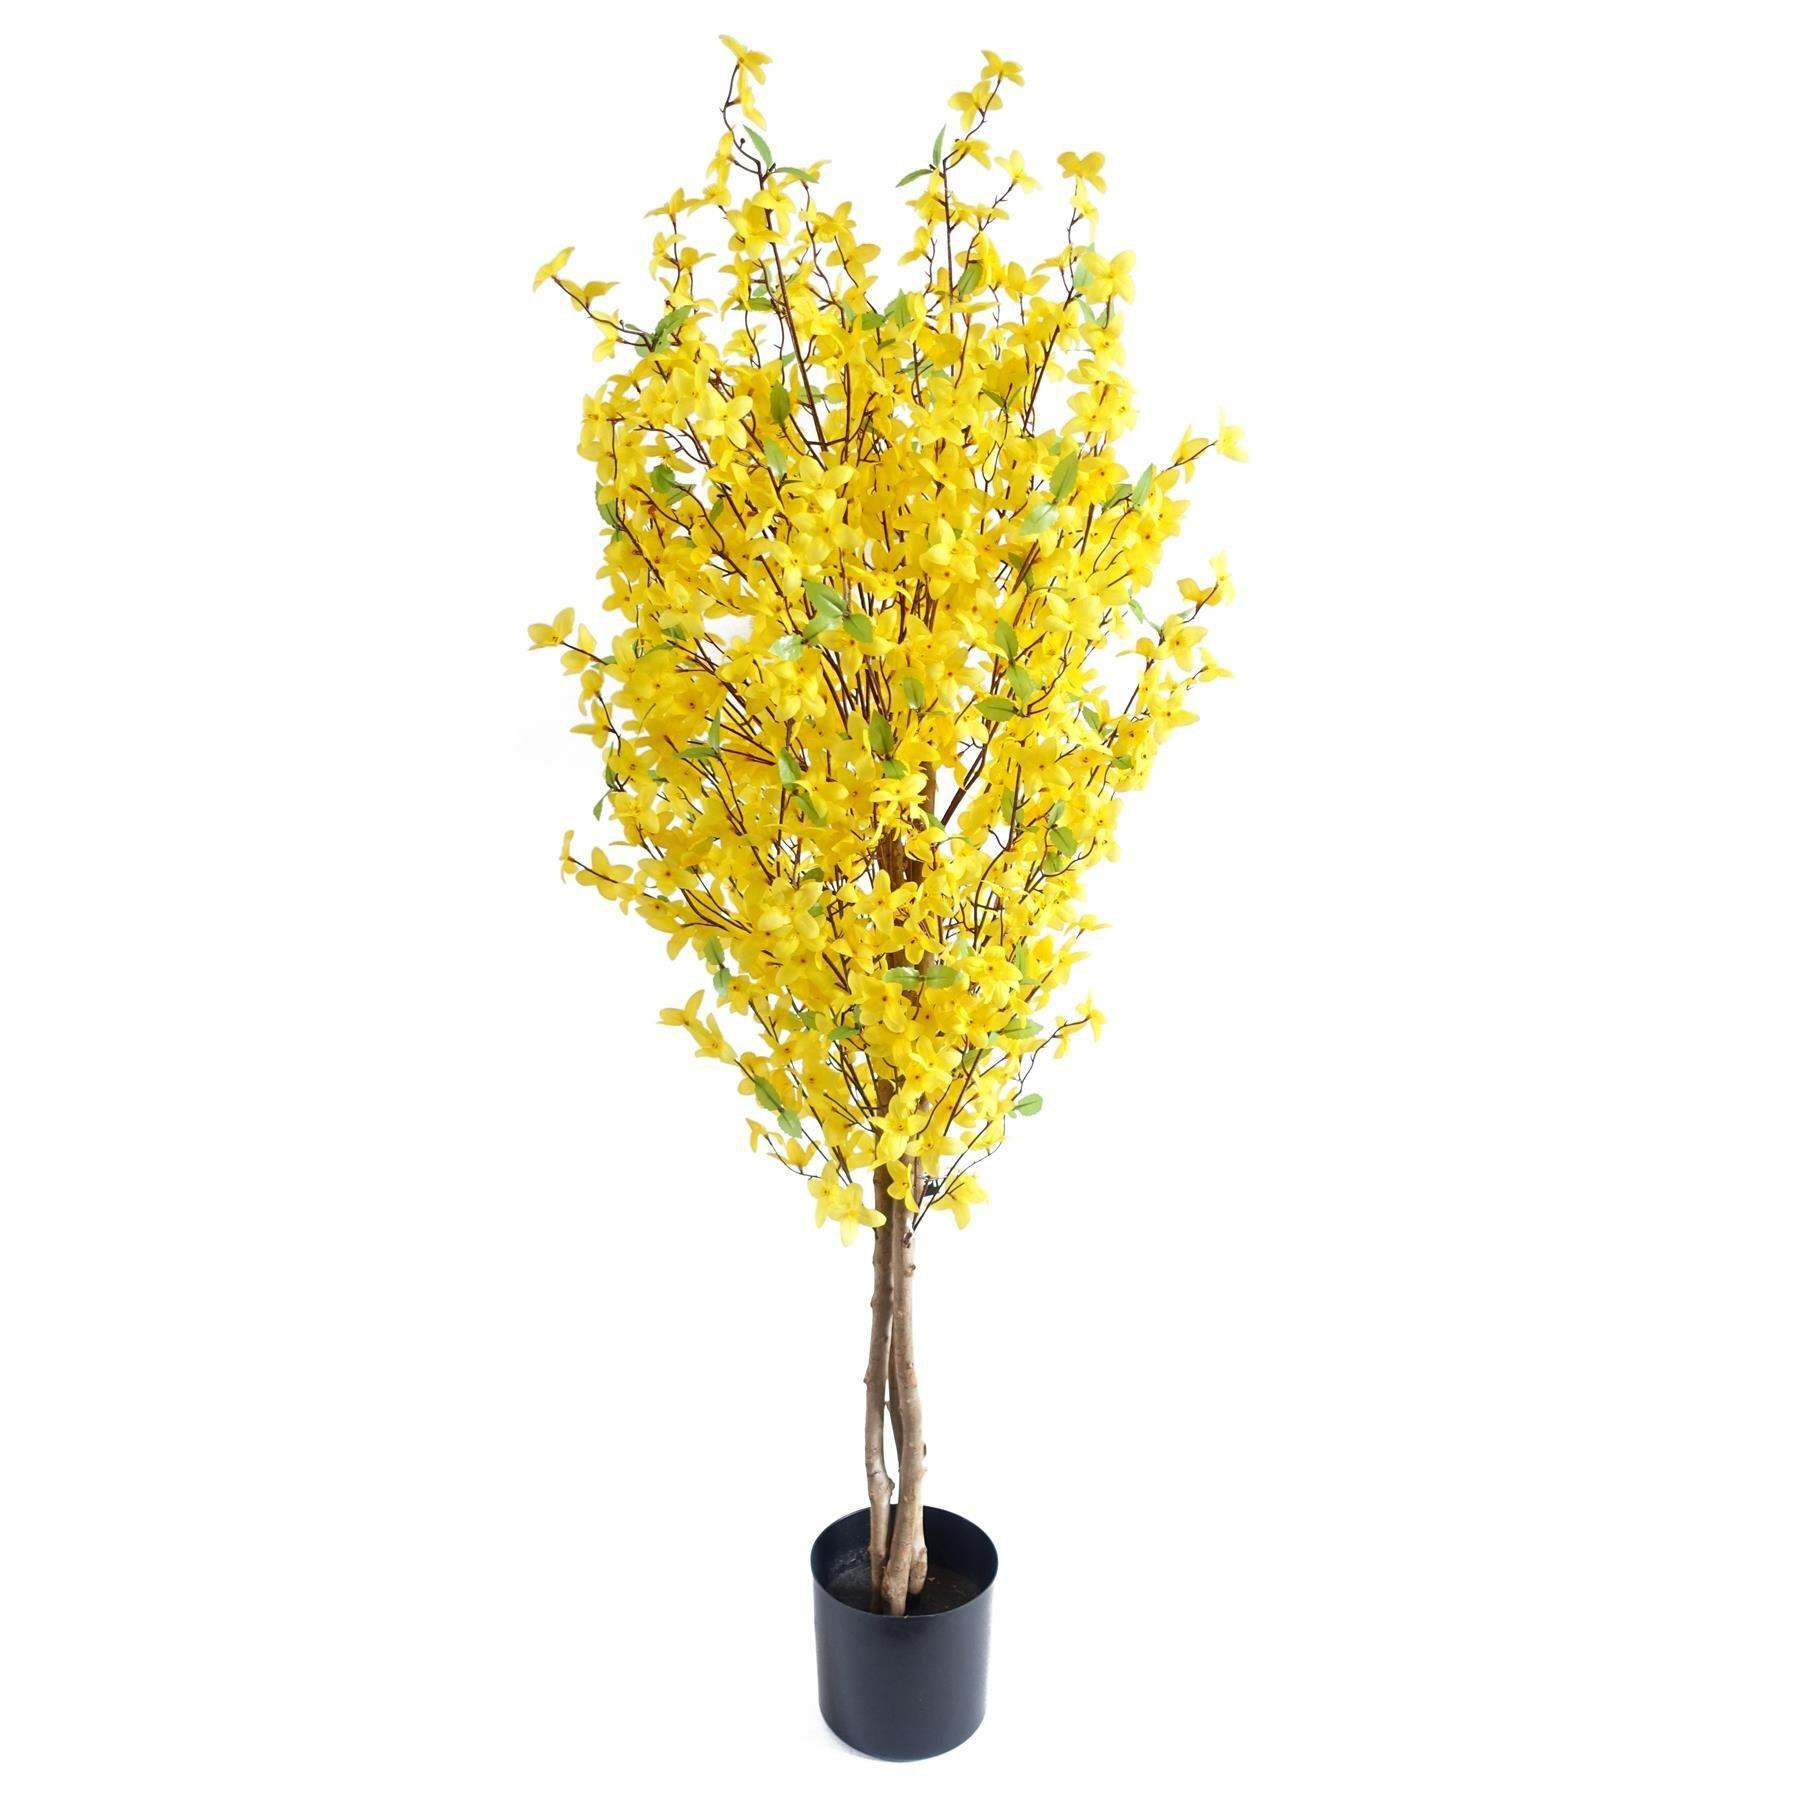 120cm Artificial Forsythia Tree Realistic Large Natural - image 1